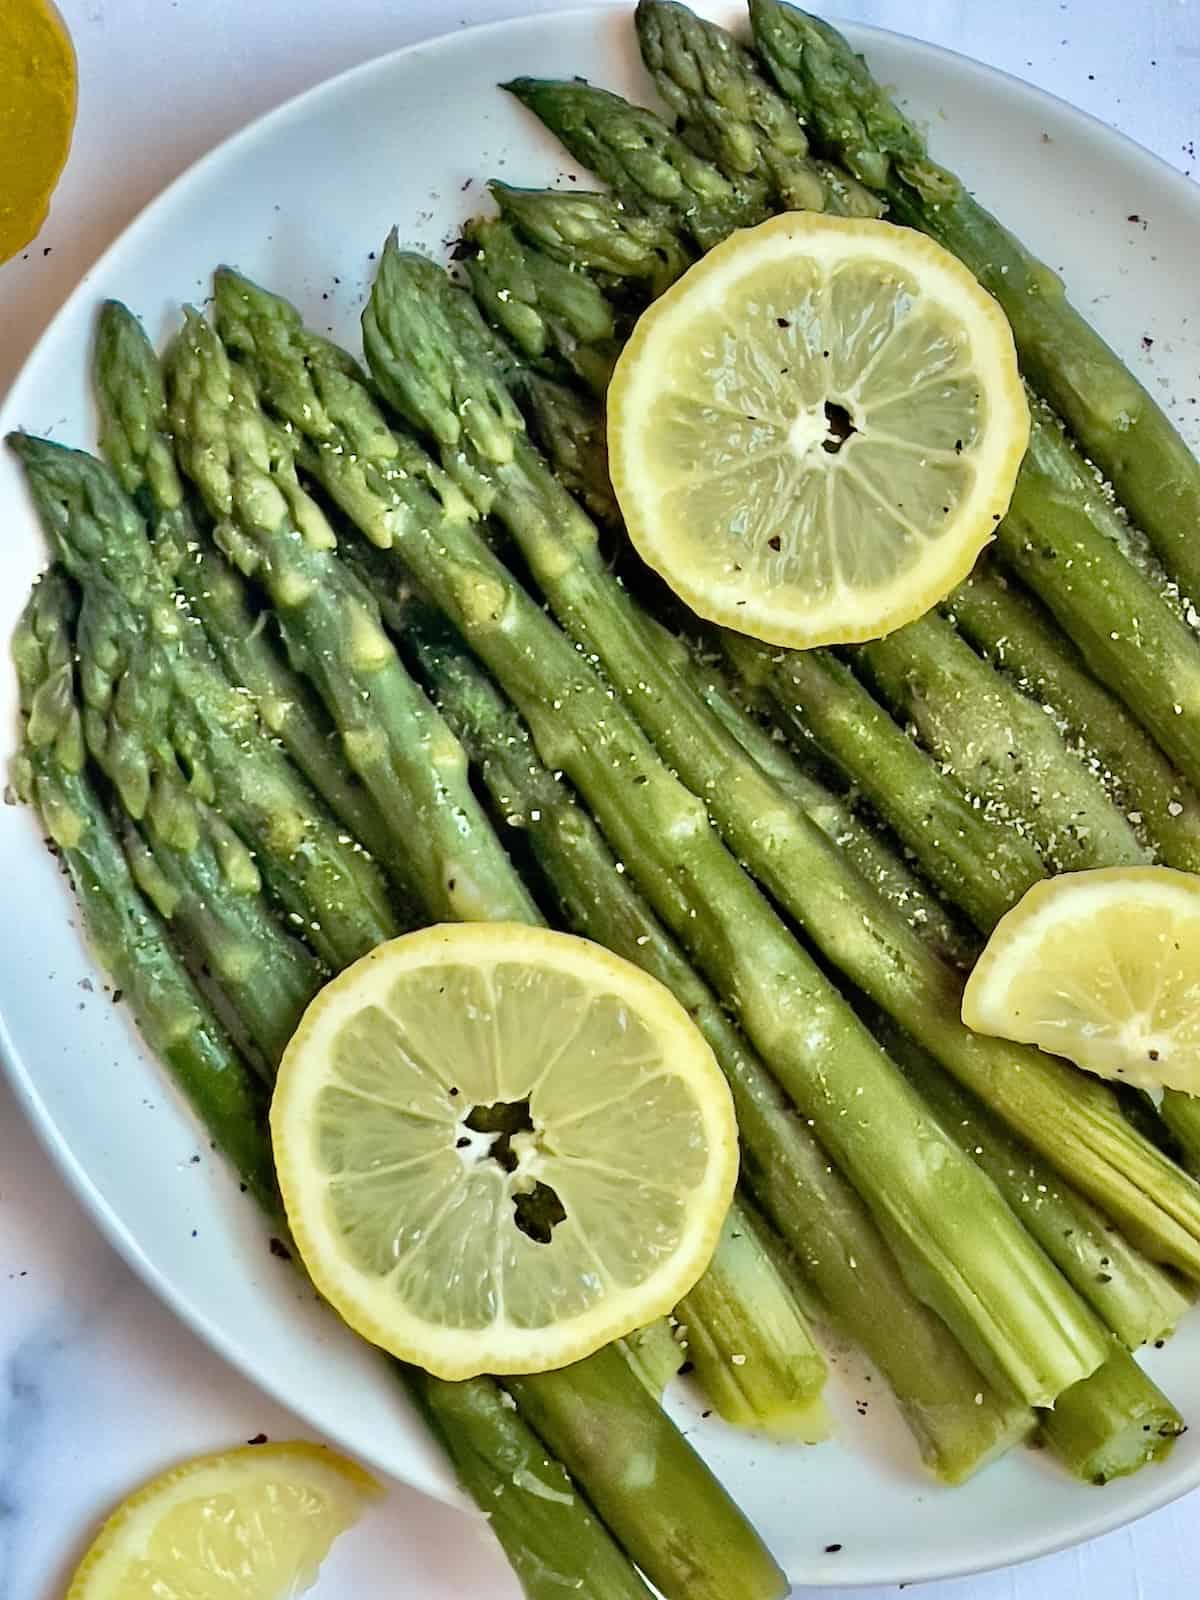 pressure cooked asparagus spears on a plate topped with lemon slices